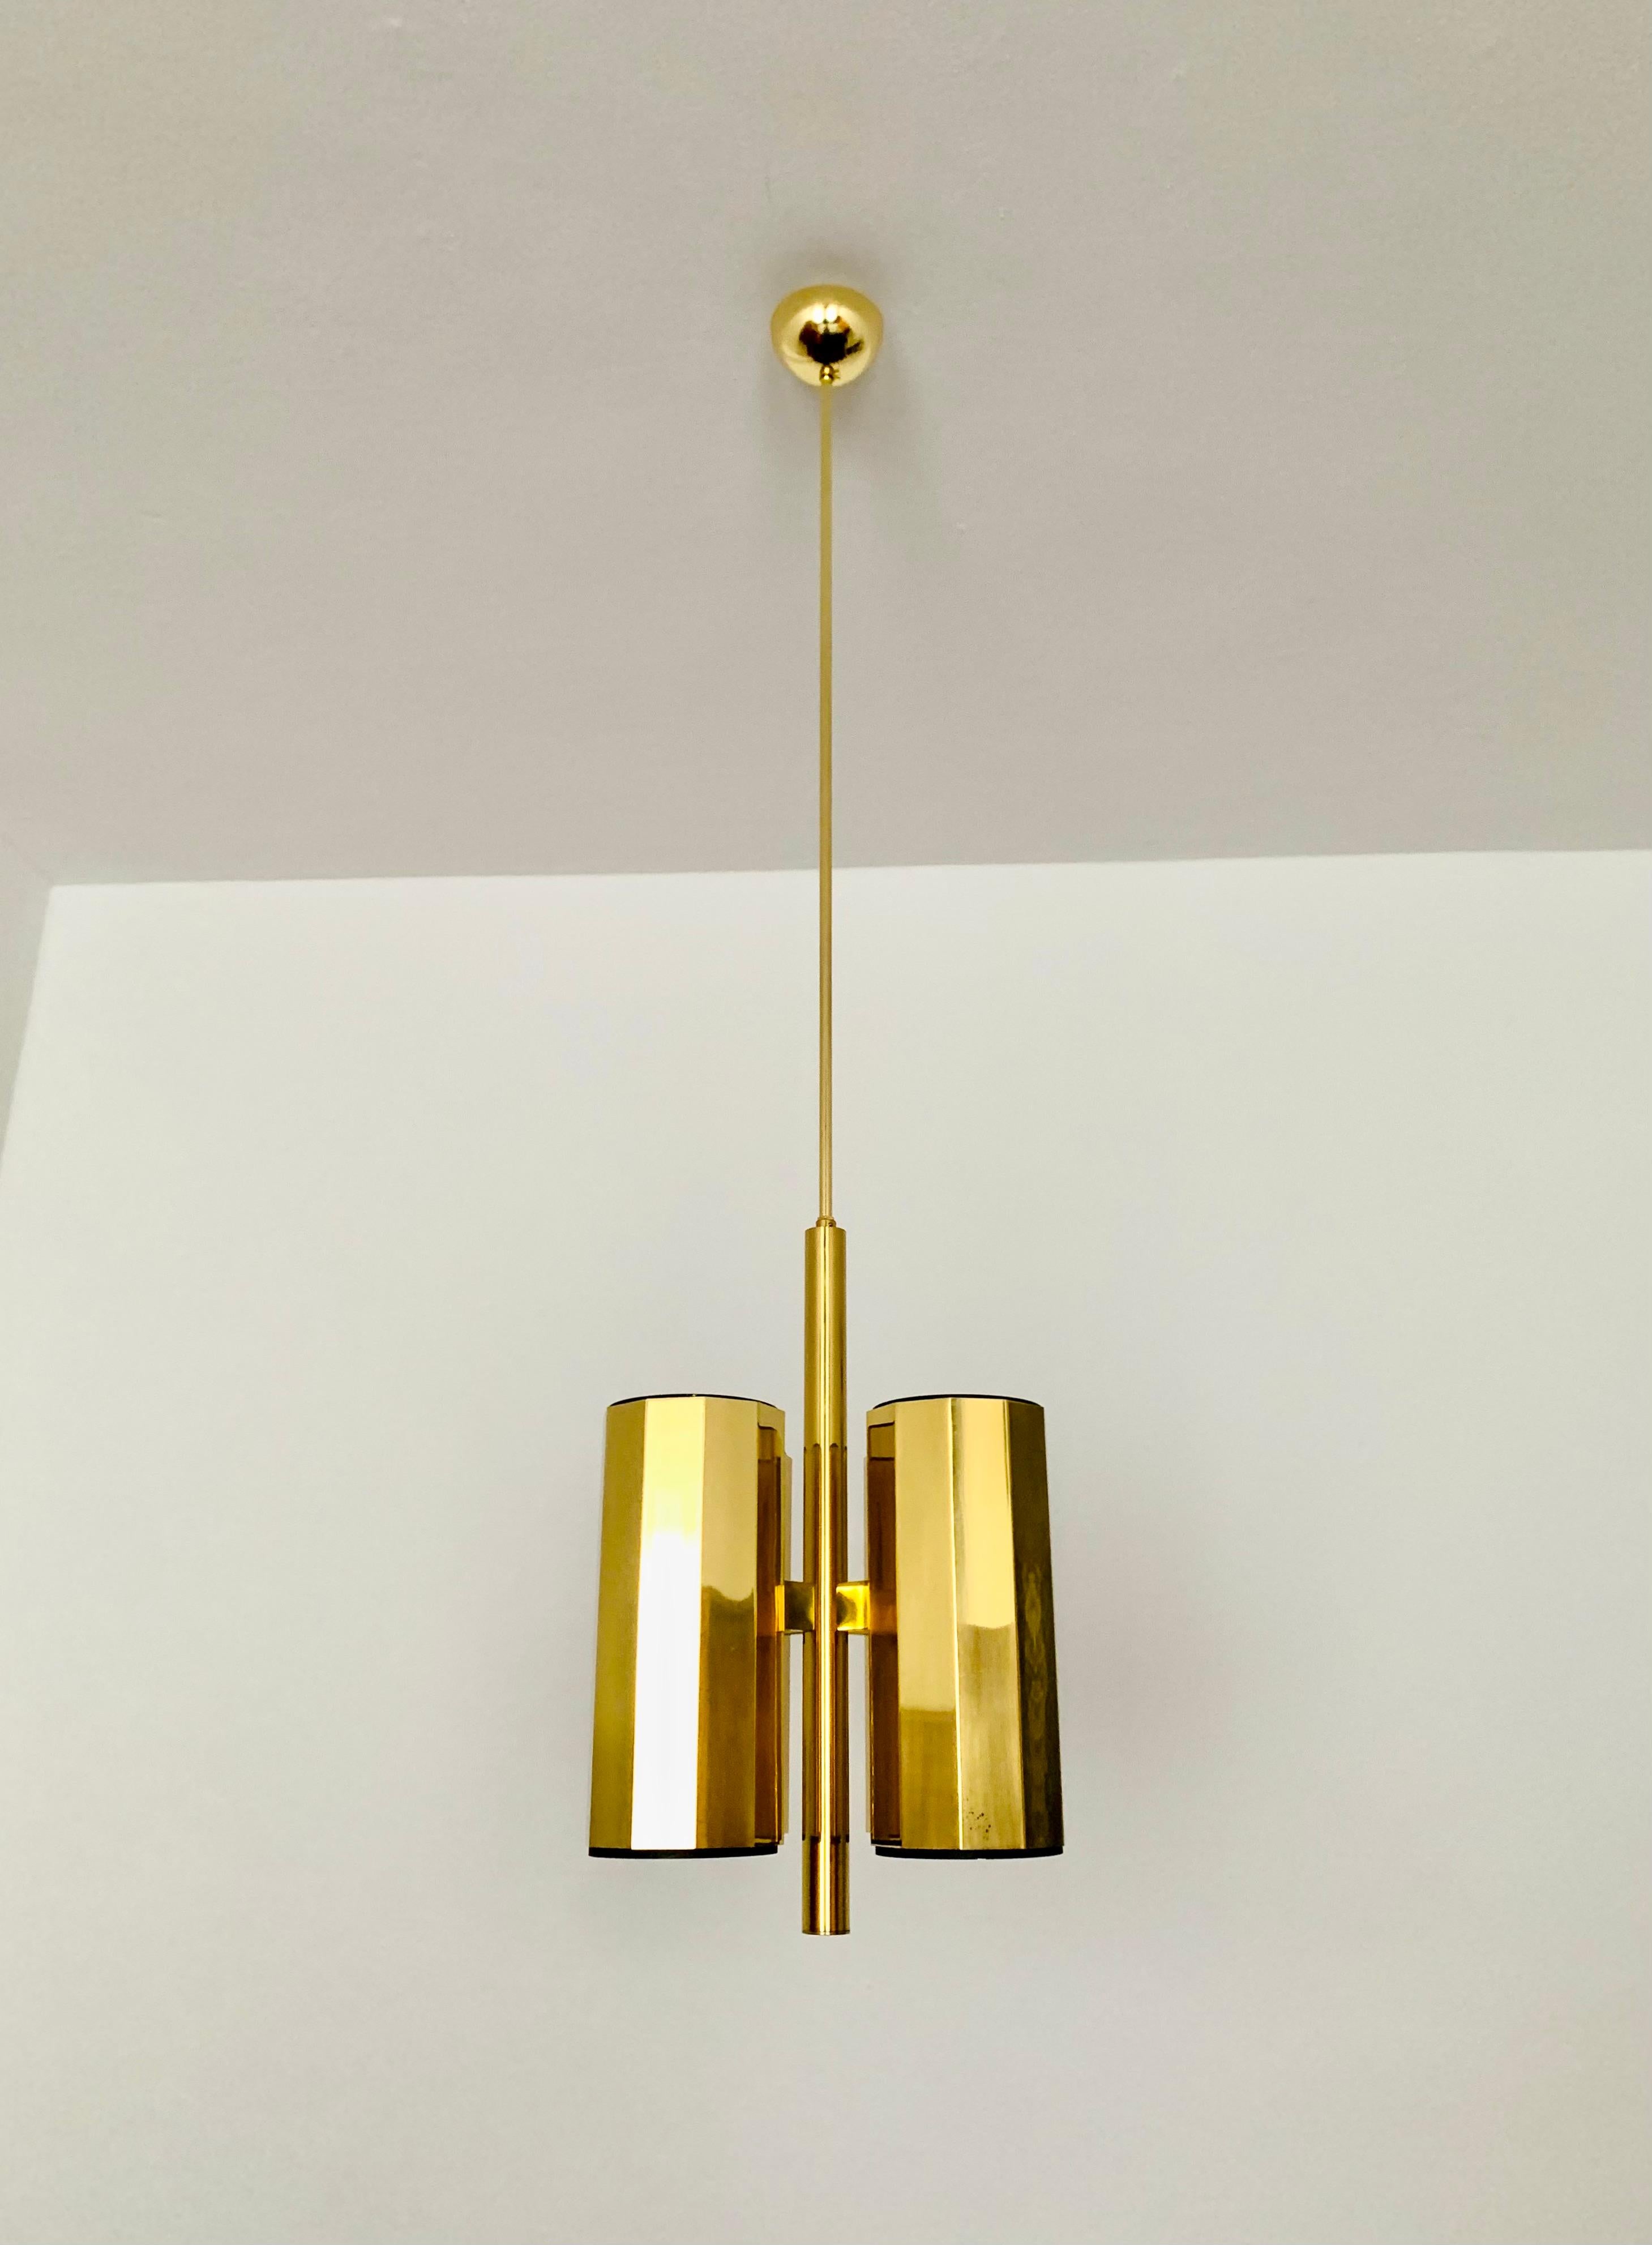 Impressively beautiful brass chandelier from the 1960s.
High-quality workmanship and an absolute highlight for every room.
A beautiful lighting mood is created.

Condition:

Very good vintage condition with slight signs of wear consistent with